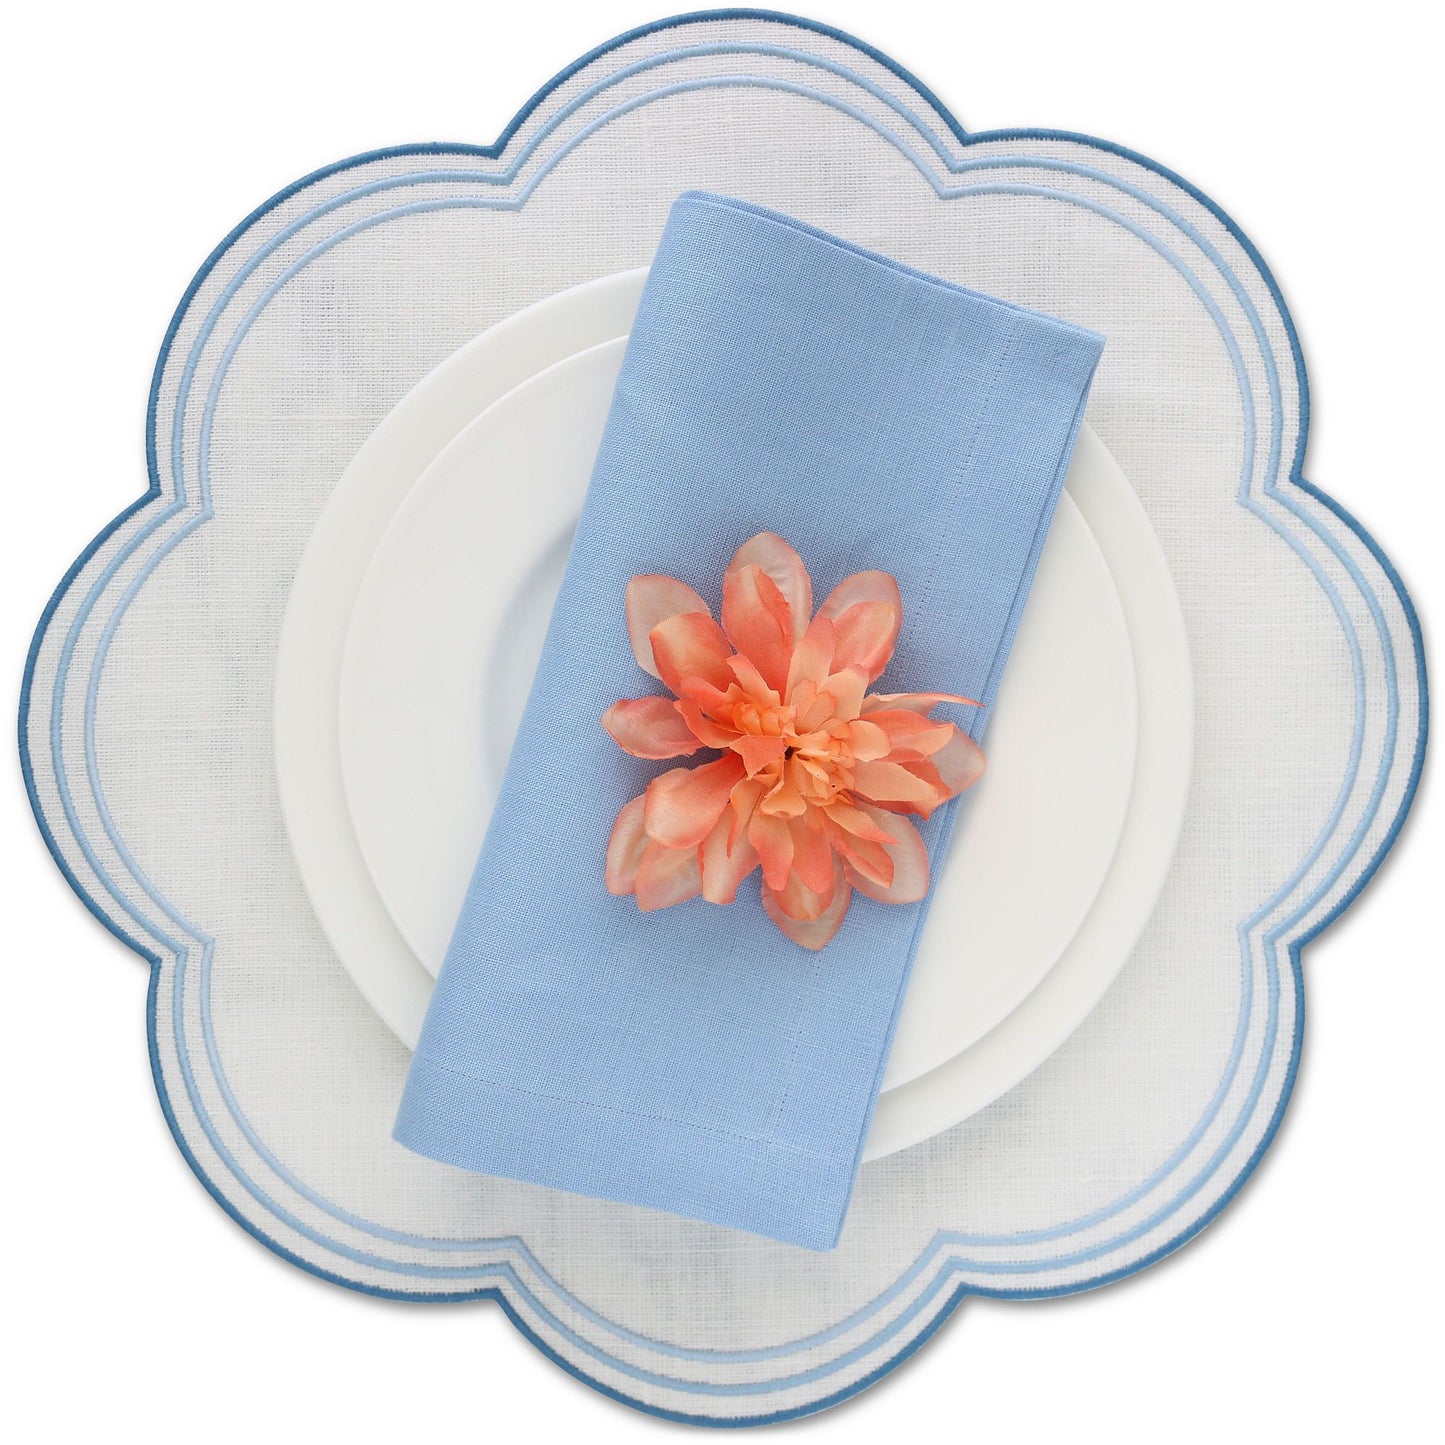 Made to order Bari Large Scallops Linen Placemats (set of 4)